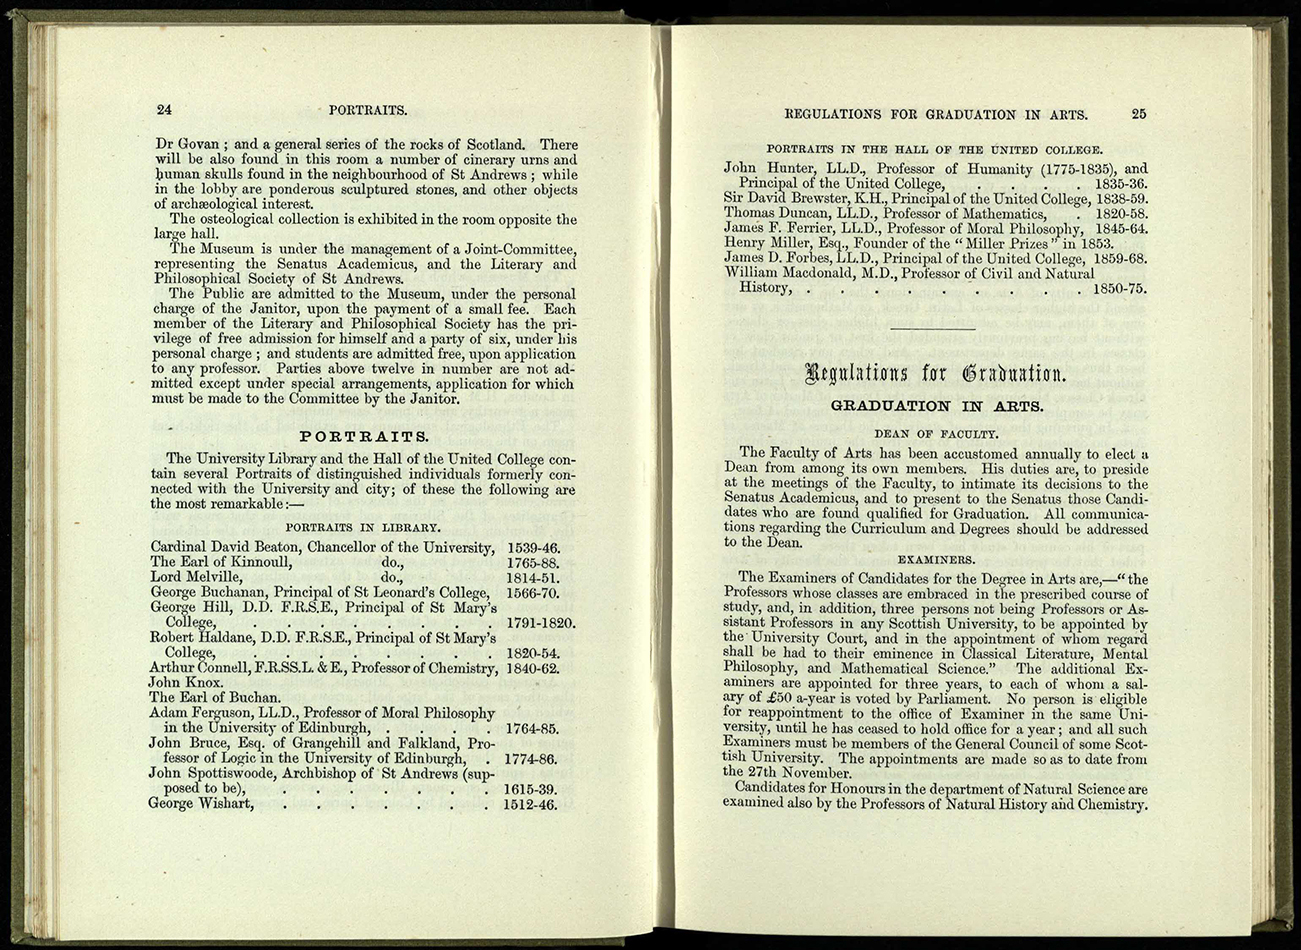 1885/6 Lists of significant items held in the University – here list of the most remarkable portraits of those distinguished individuals formerly connected with the University.